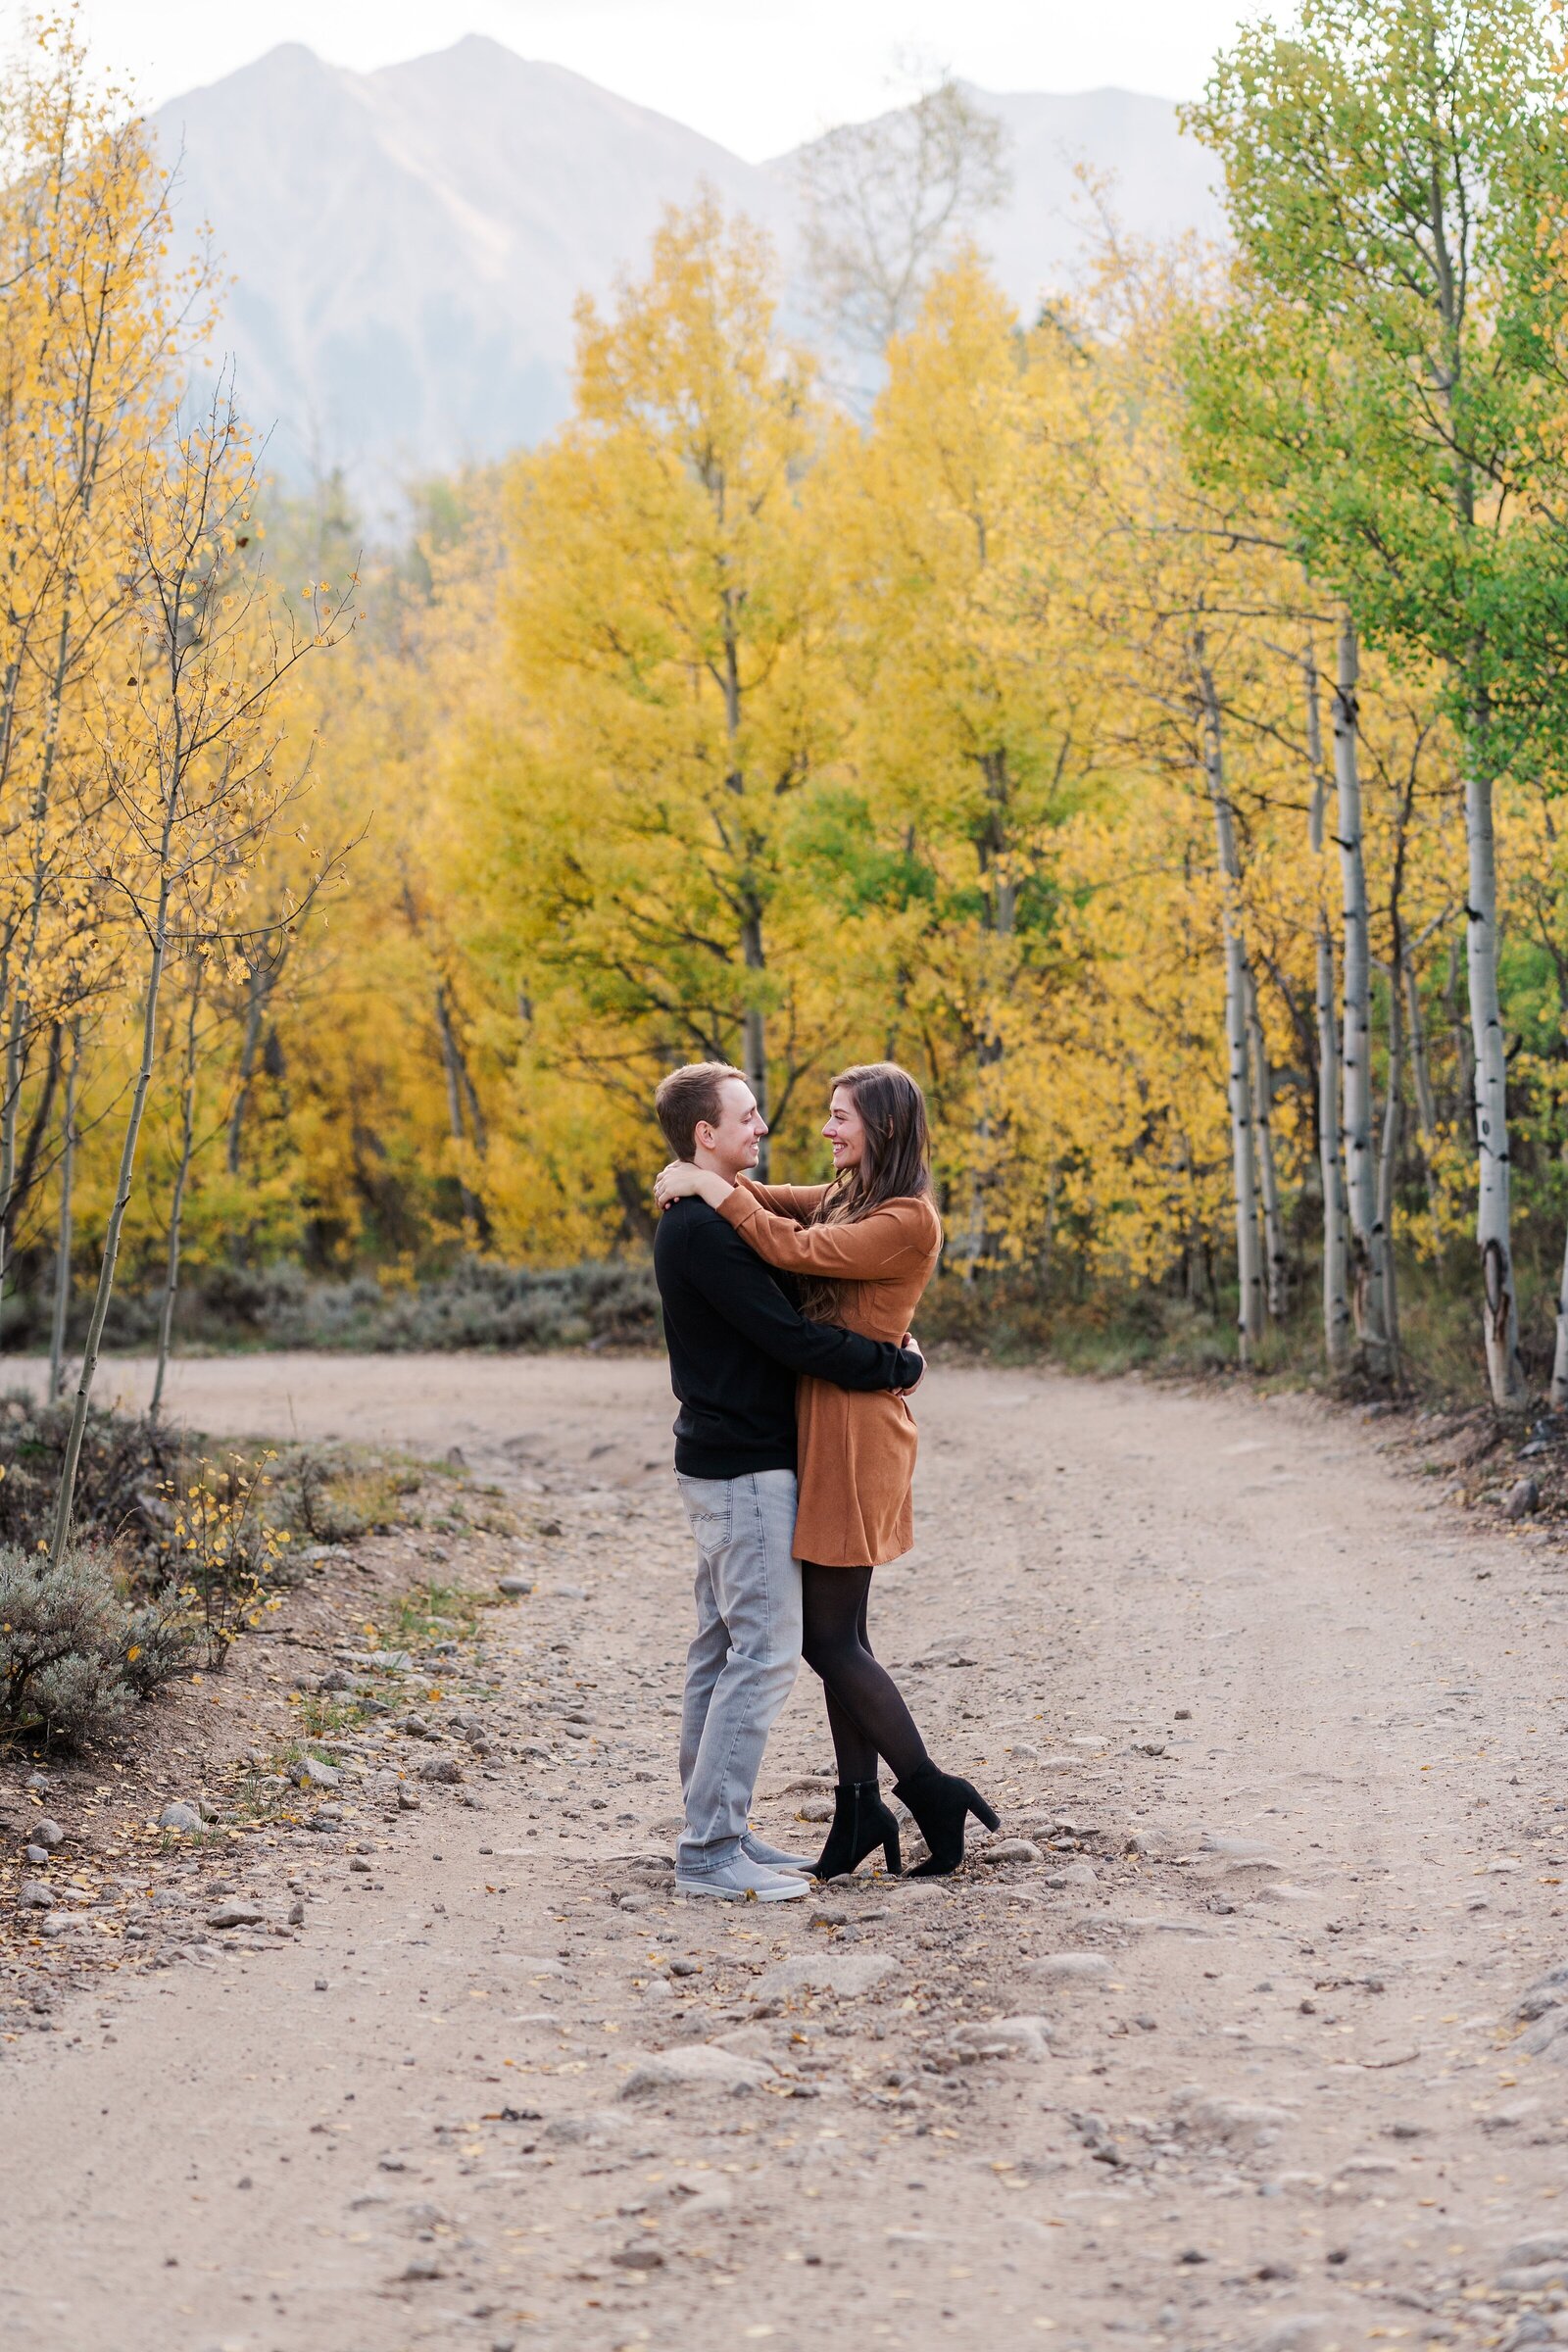 Celebrate your love story with an anniversary session captured by Sam Immer Photography. Featuring stunning Rocky Mountain views and natural light, this session will be one to cherish for years to come.